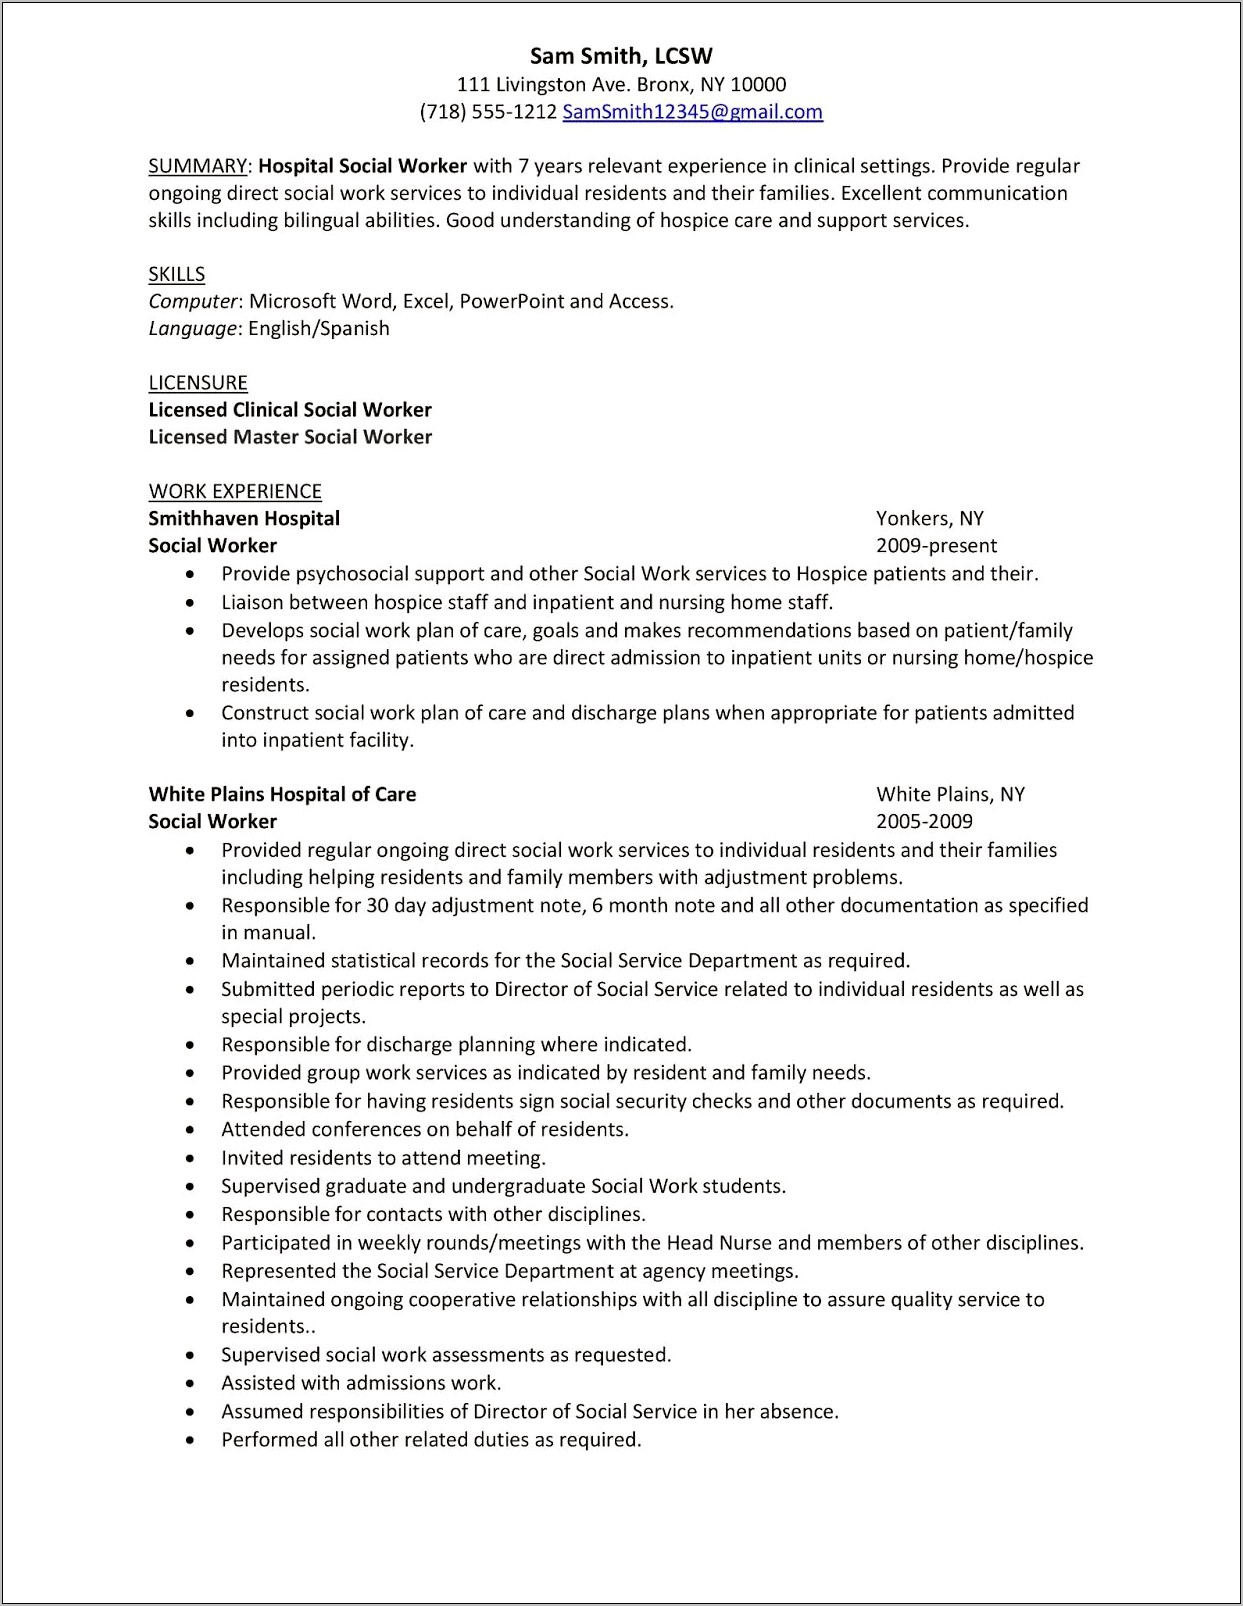 Resume Objective Statements For Social Workers